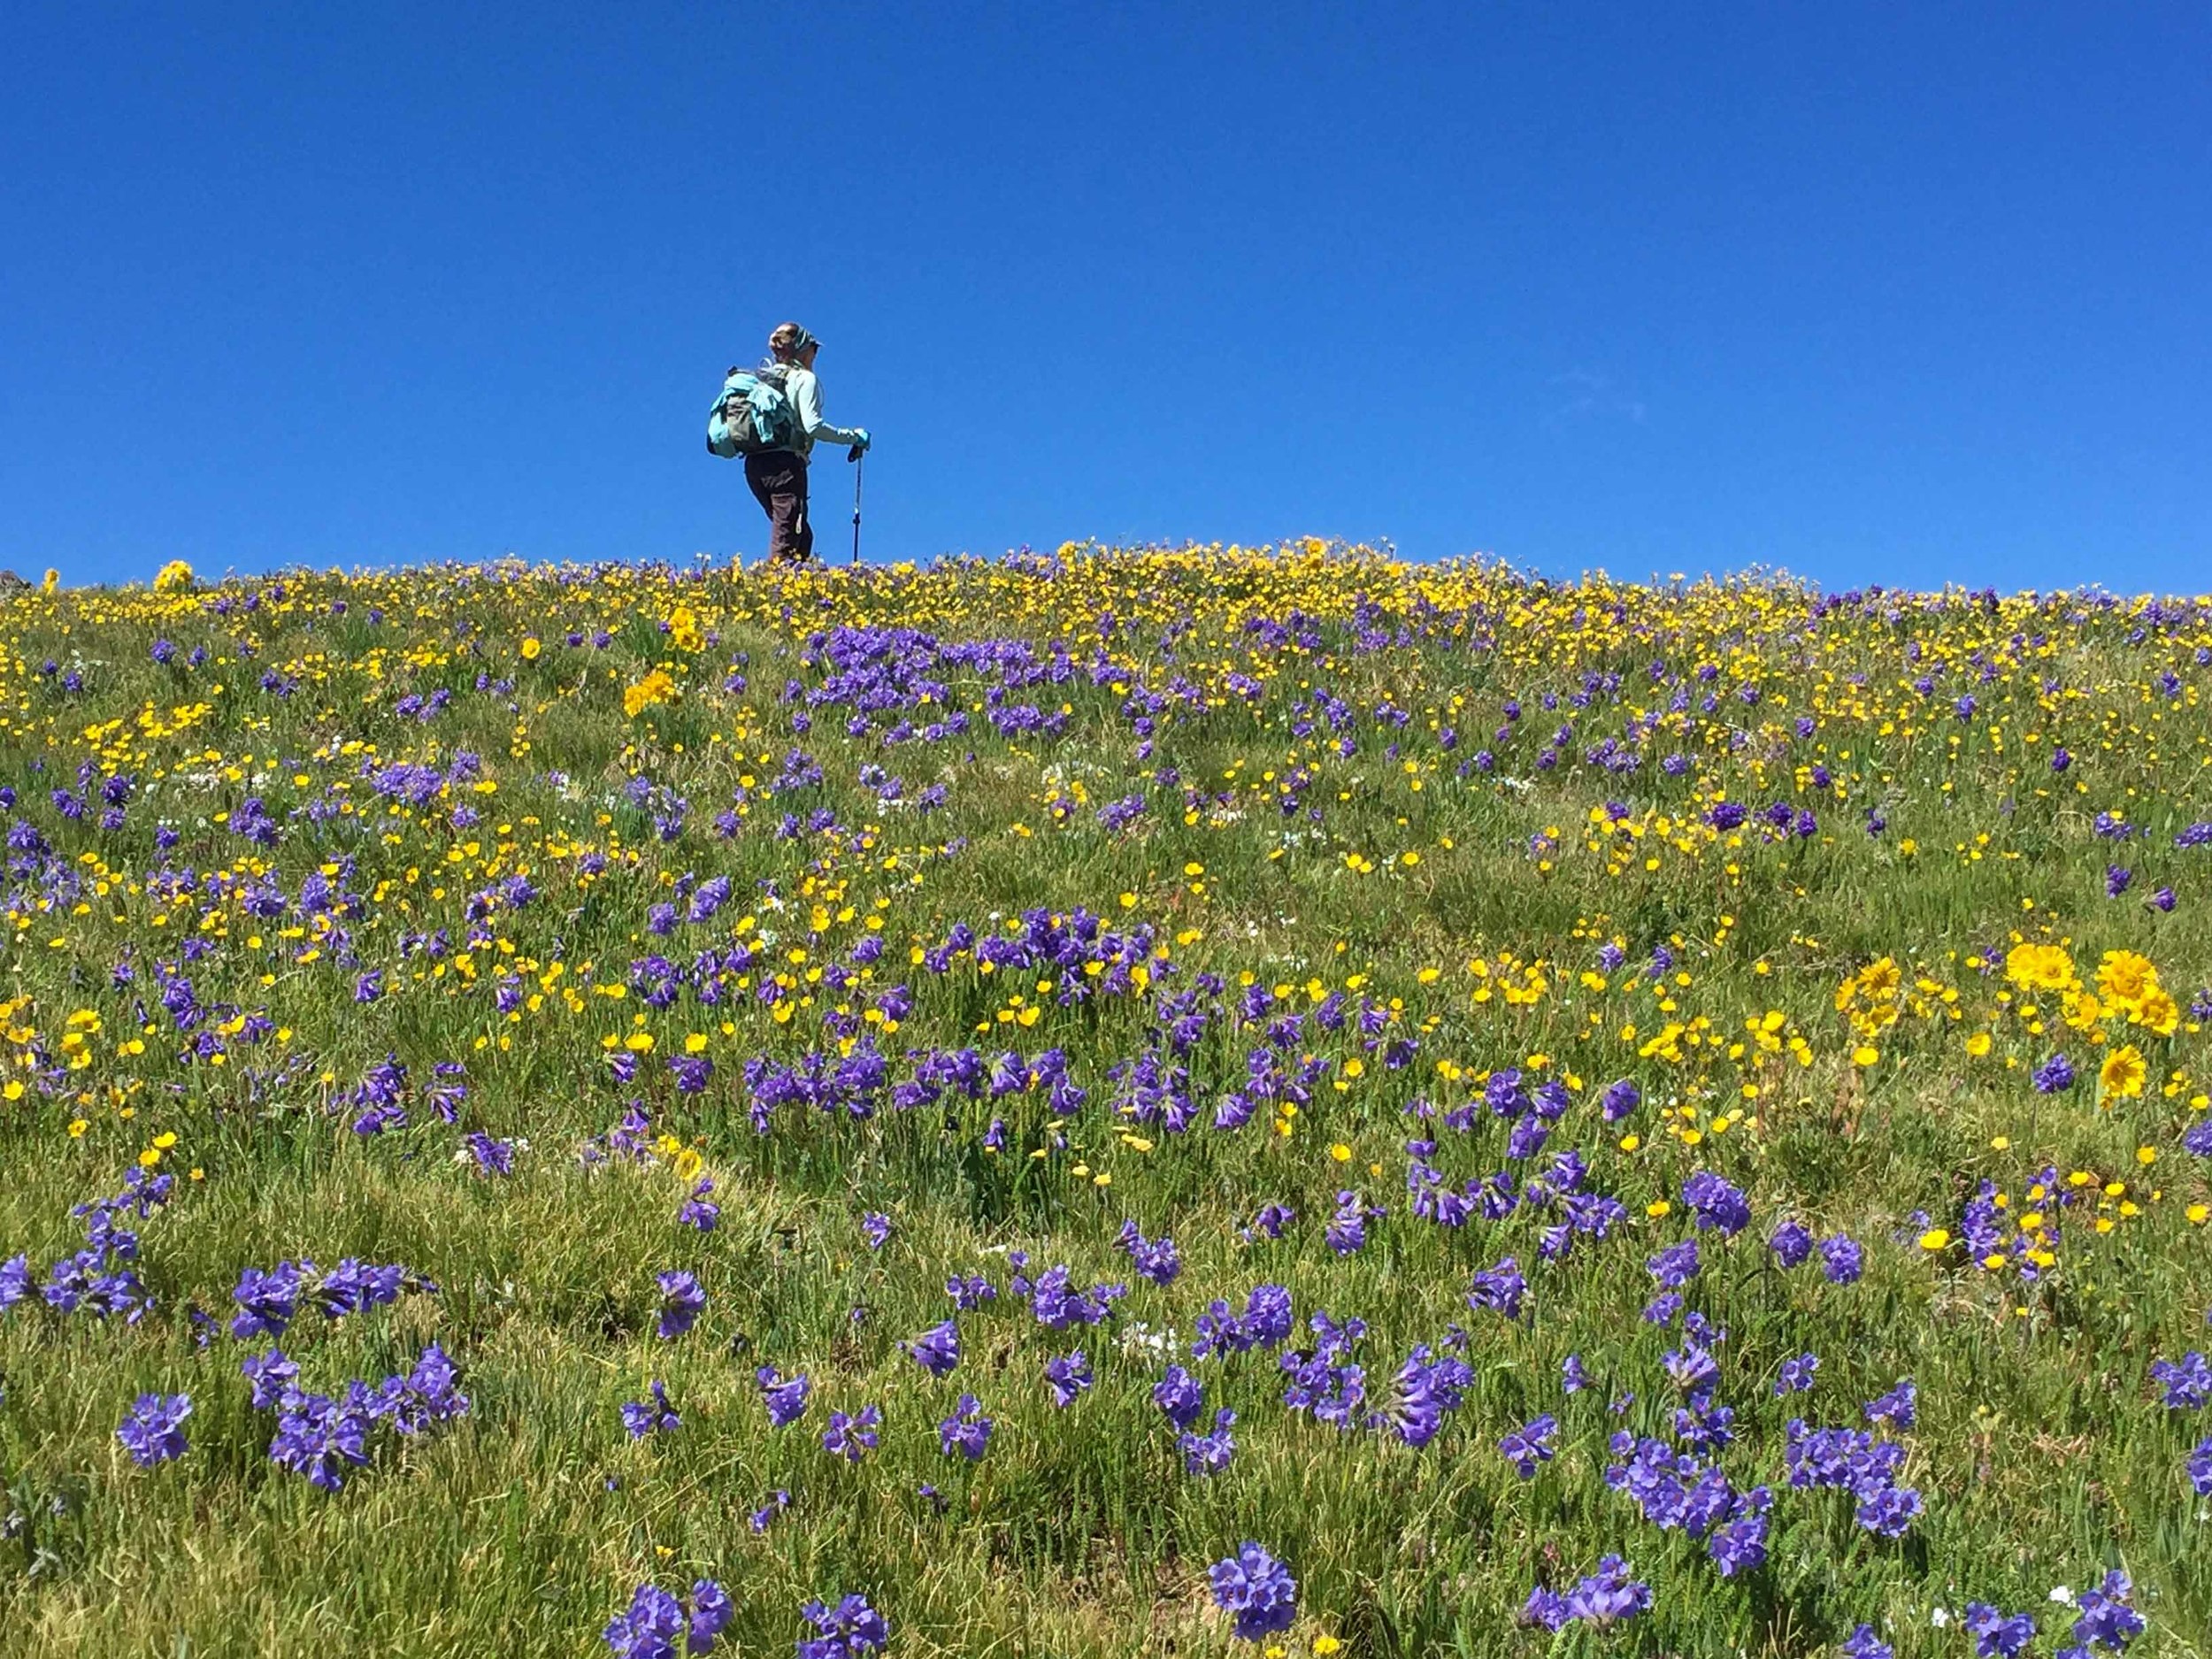 Jane Marie hiking through the wildflowers. The Sky pilots are so beautiful. 